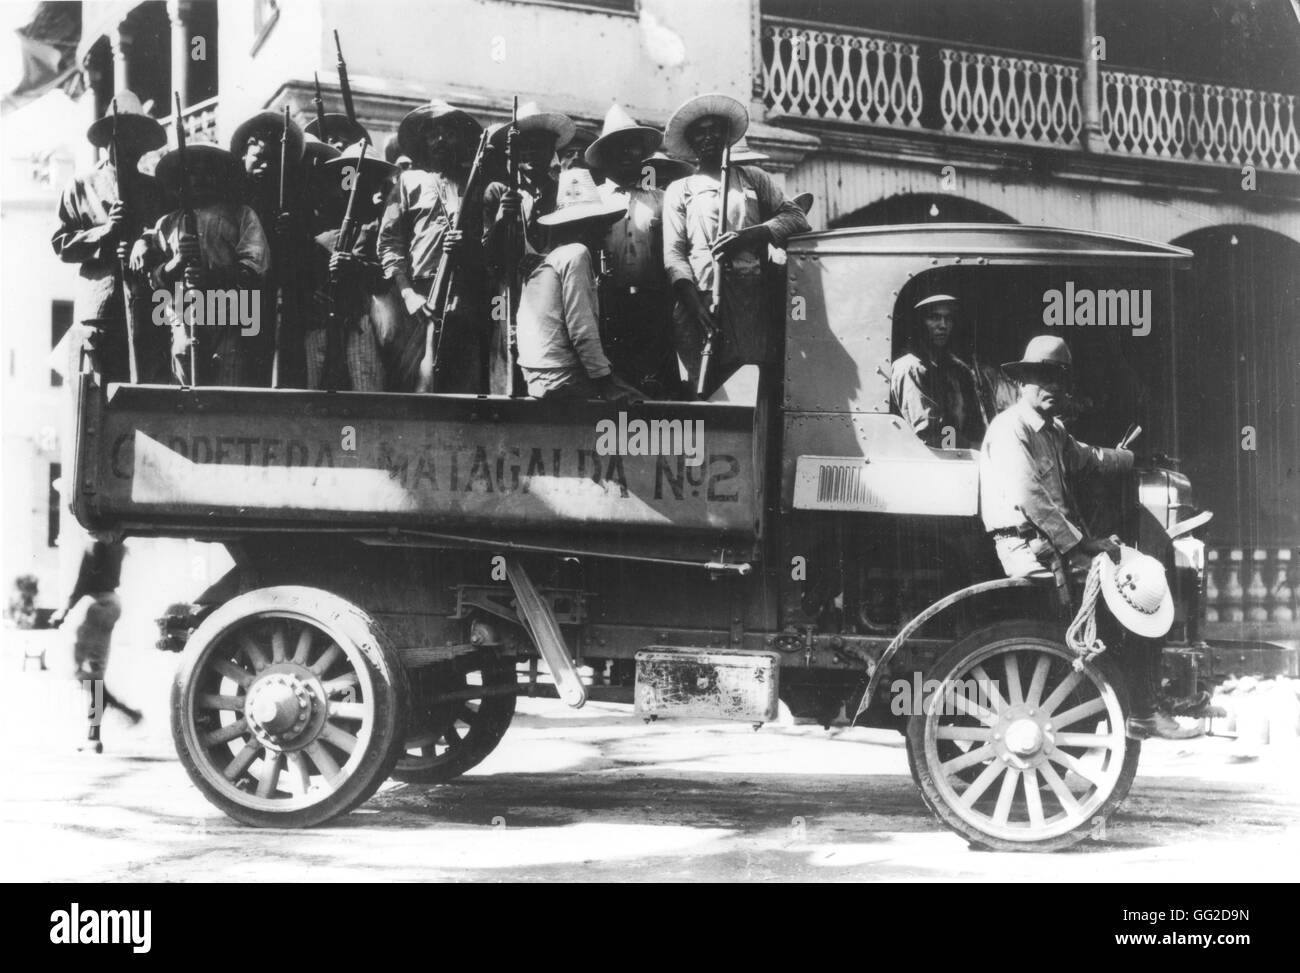 Transporting the troops 1927 Nicaragua Washington, D.C. National Archives Stock Photo